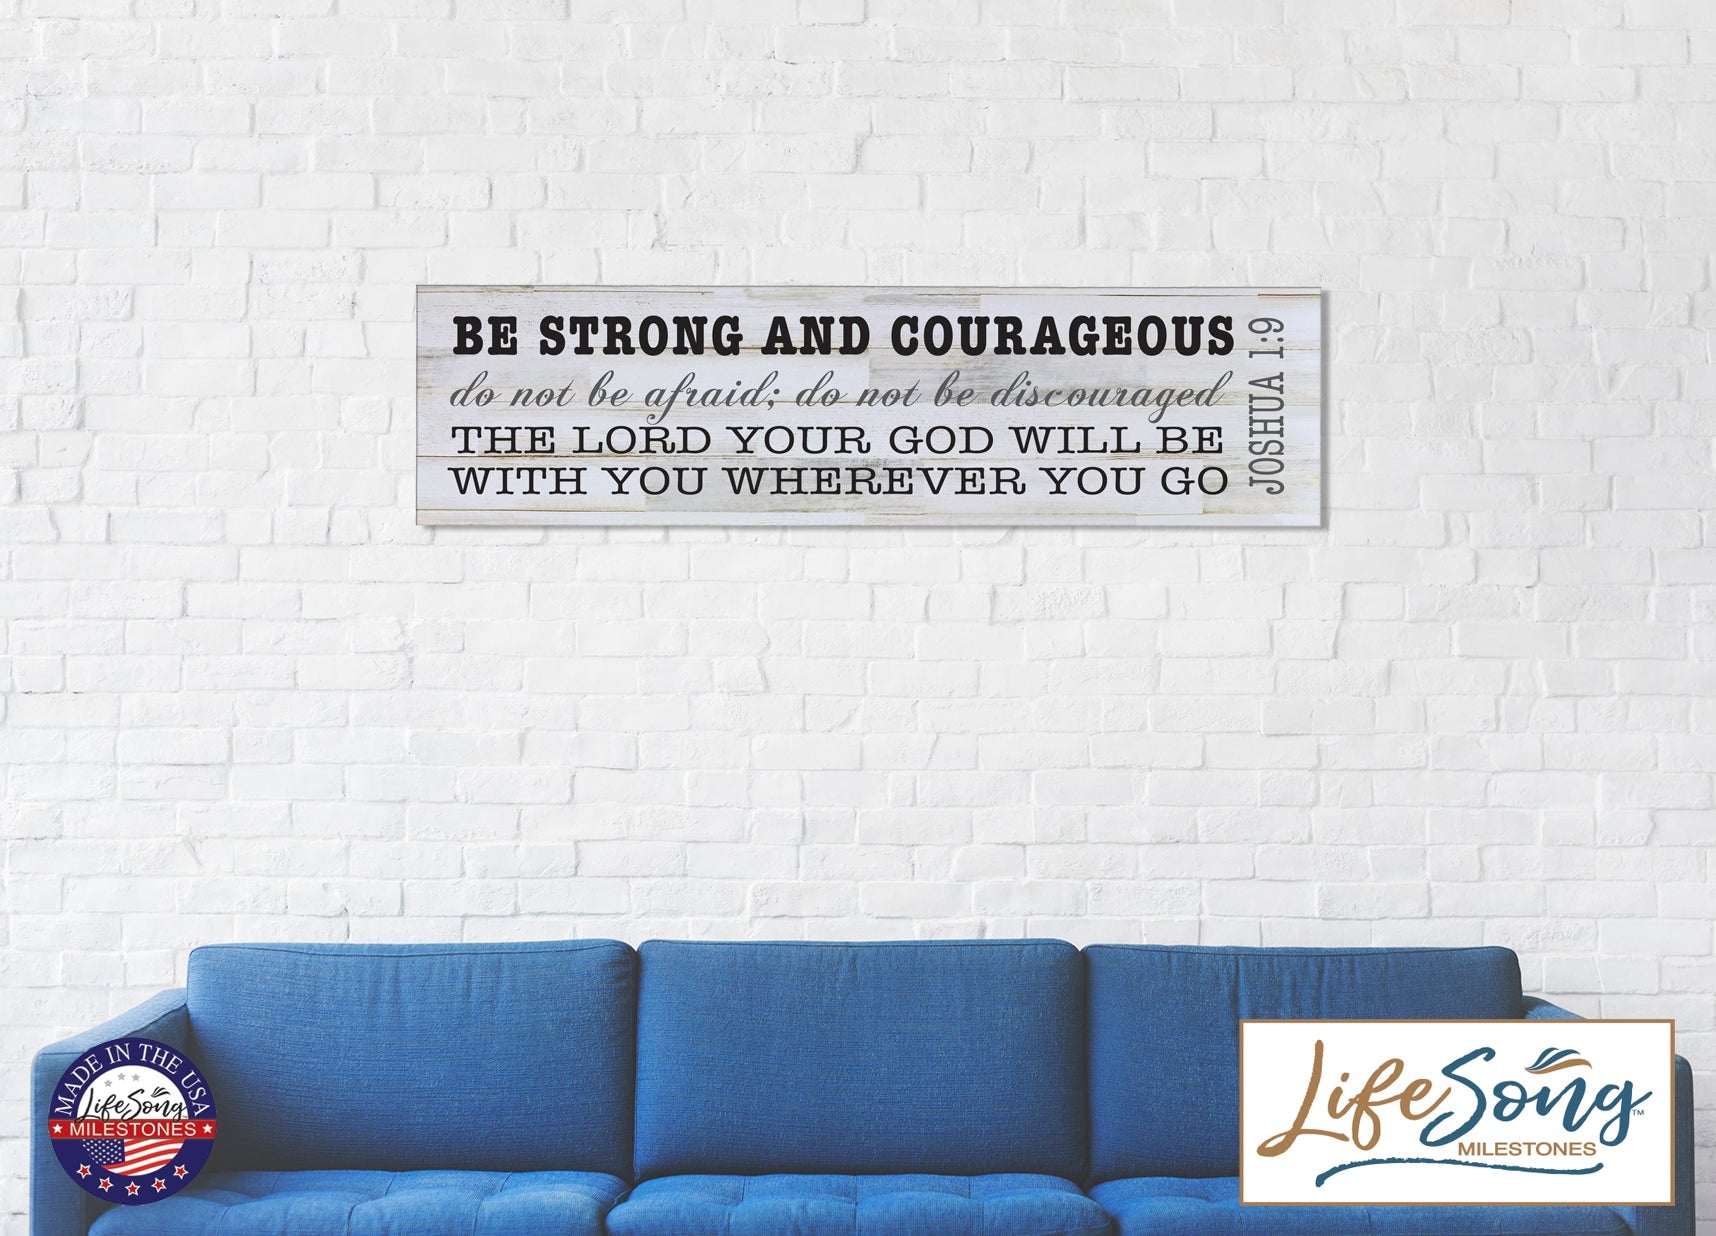 10" x 40" x .0625" Wall Plaque - Be Strong and Courageous Joshua 1:9 wall art Decorative Wall Sign - LifeSong Milestones